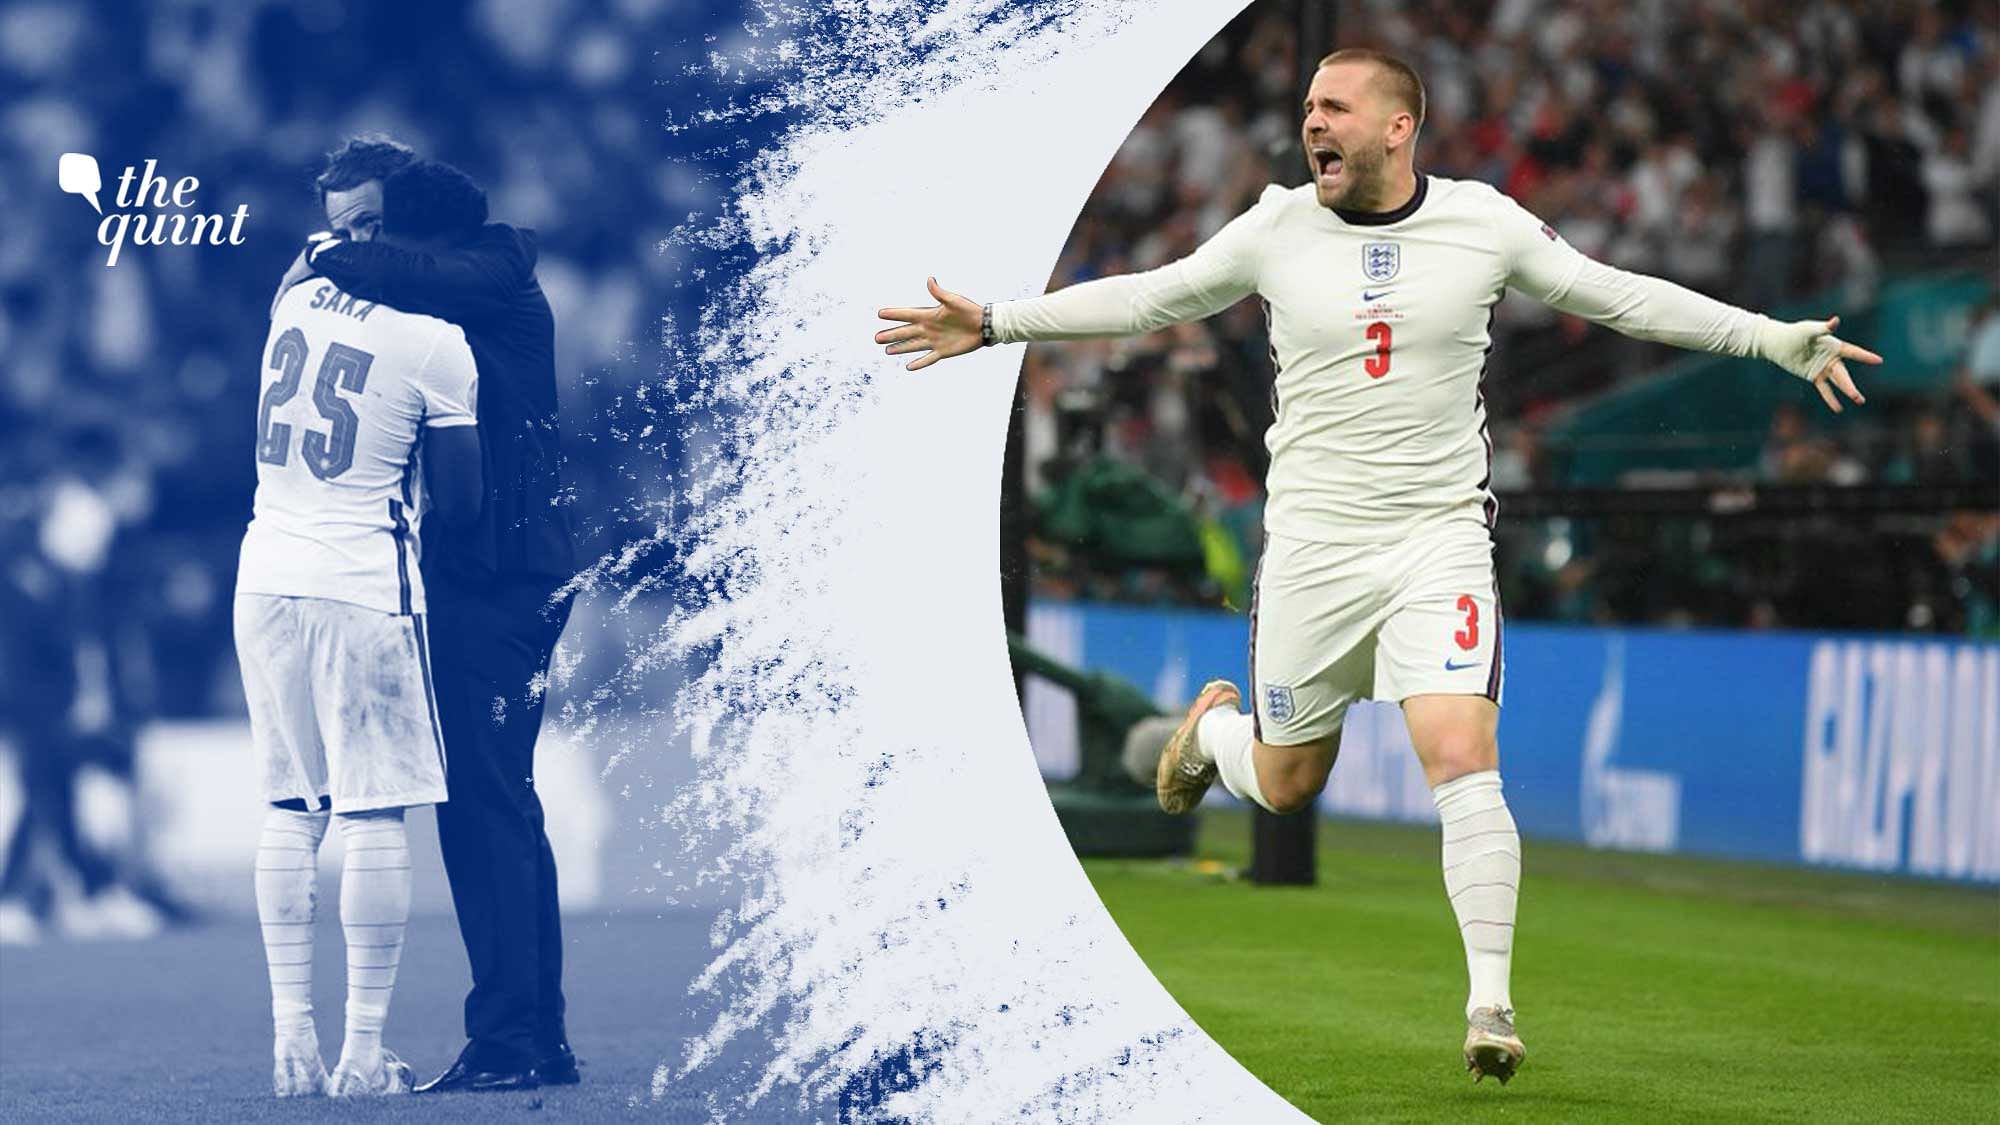 <div class="paragraphs"><p>England’s black footballers who missed penalties in the shootout in the Euro 2020 final against Italy were subjected to racist abuse online.</p></div>